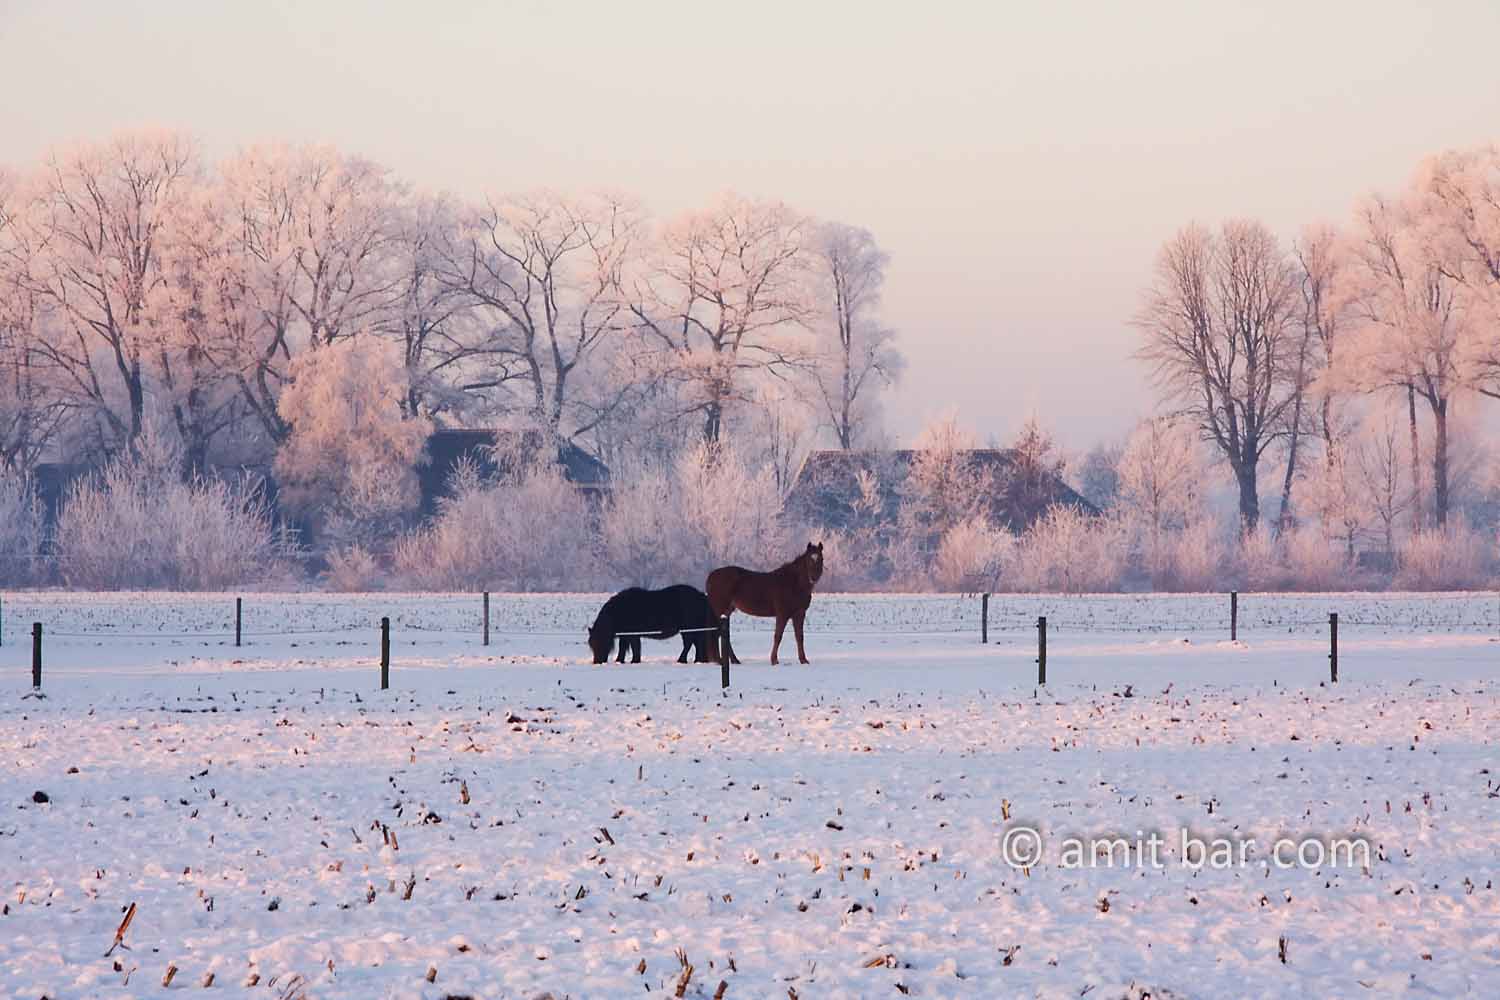 Black horses: Black horses in a frosted field